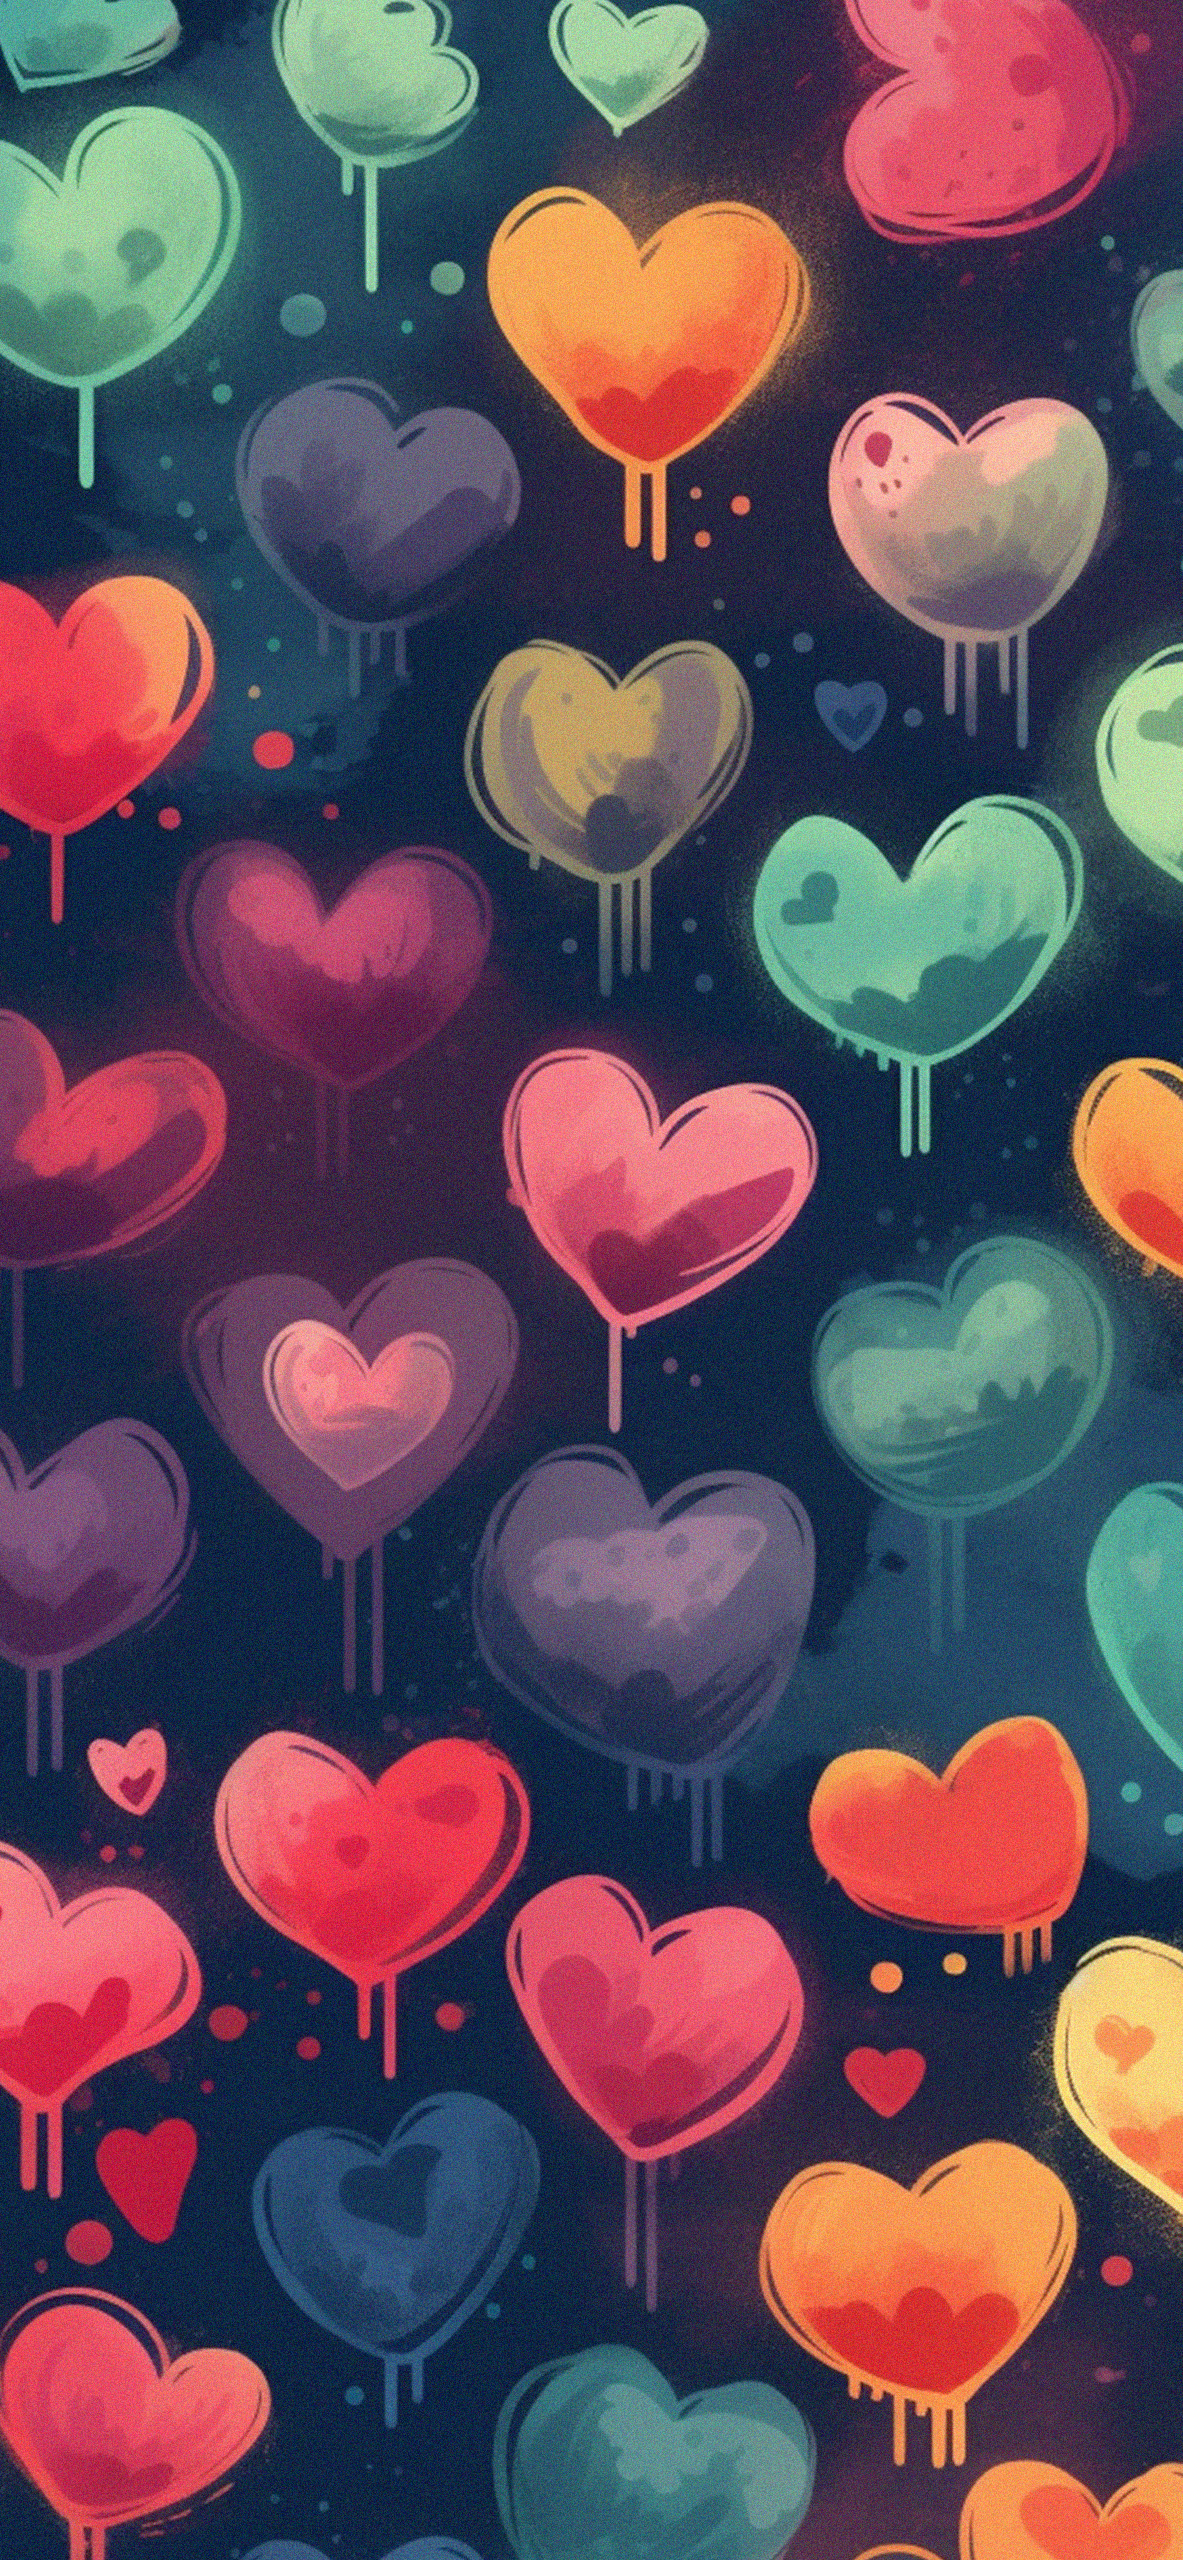 Red hearts Wallpaper 4K, Bokeh, Red background, Blurred